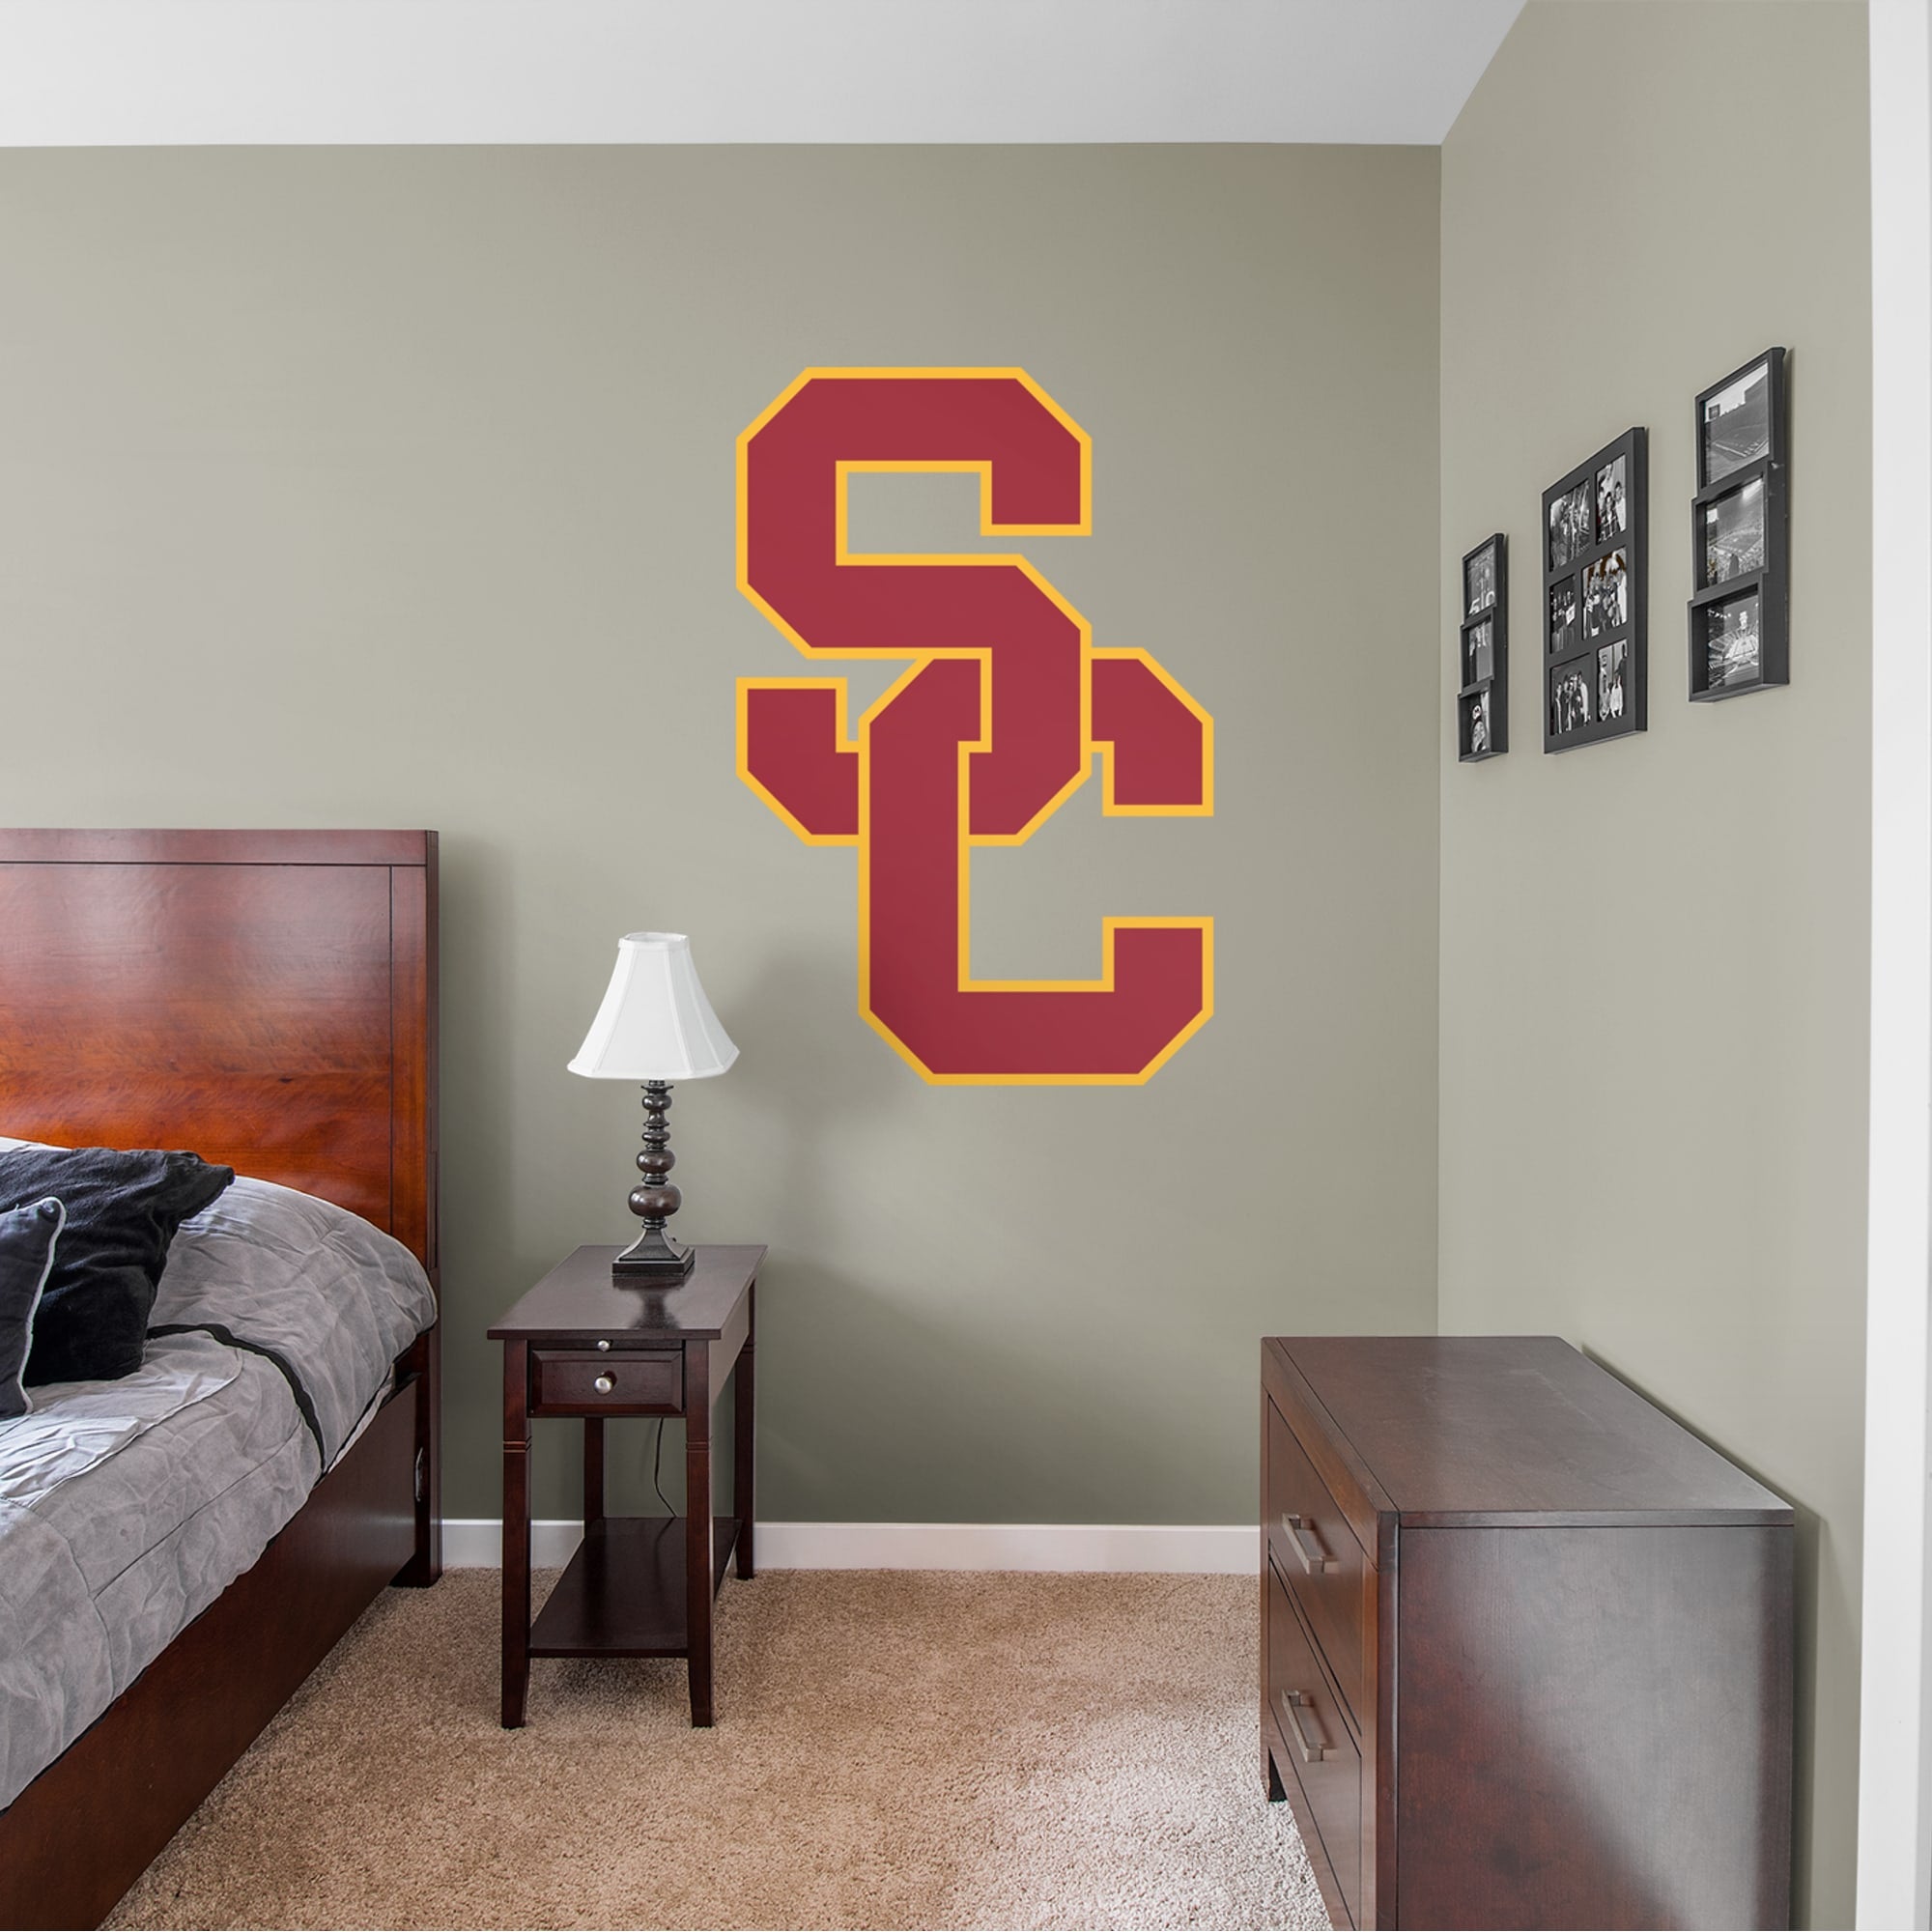 USC Trojans: Logo - Officially Licensed Removable Wall Decal 34.0"W x 51.0"H by Fathead | Vinyl